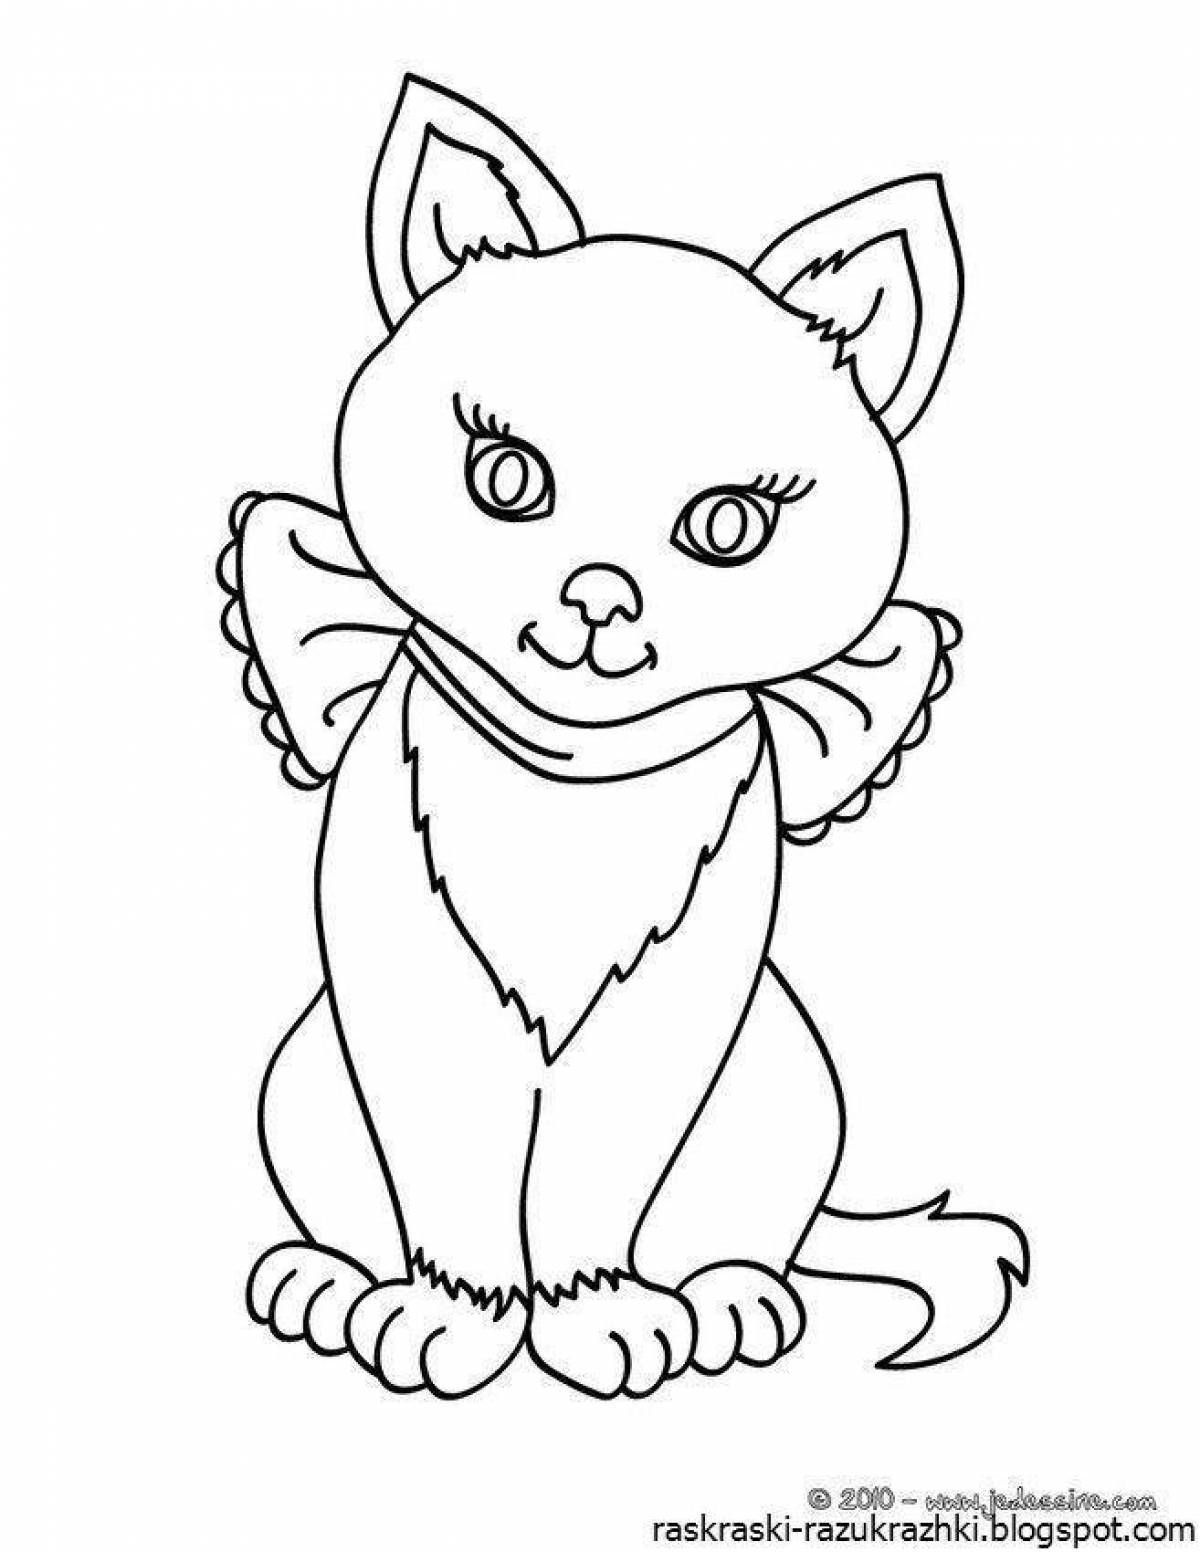 Adorable cat coloring pages for girls